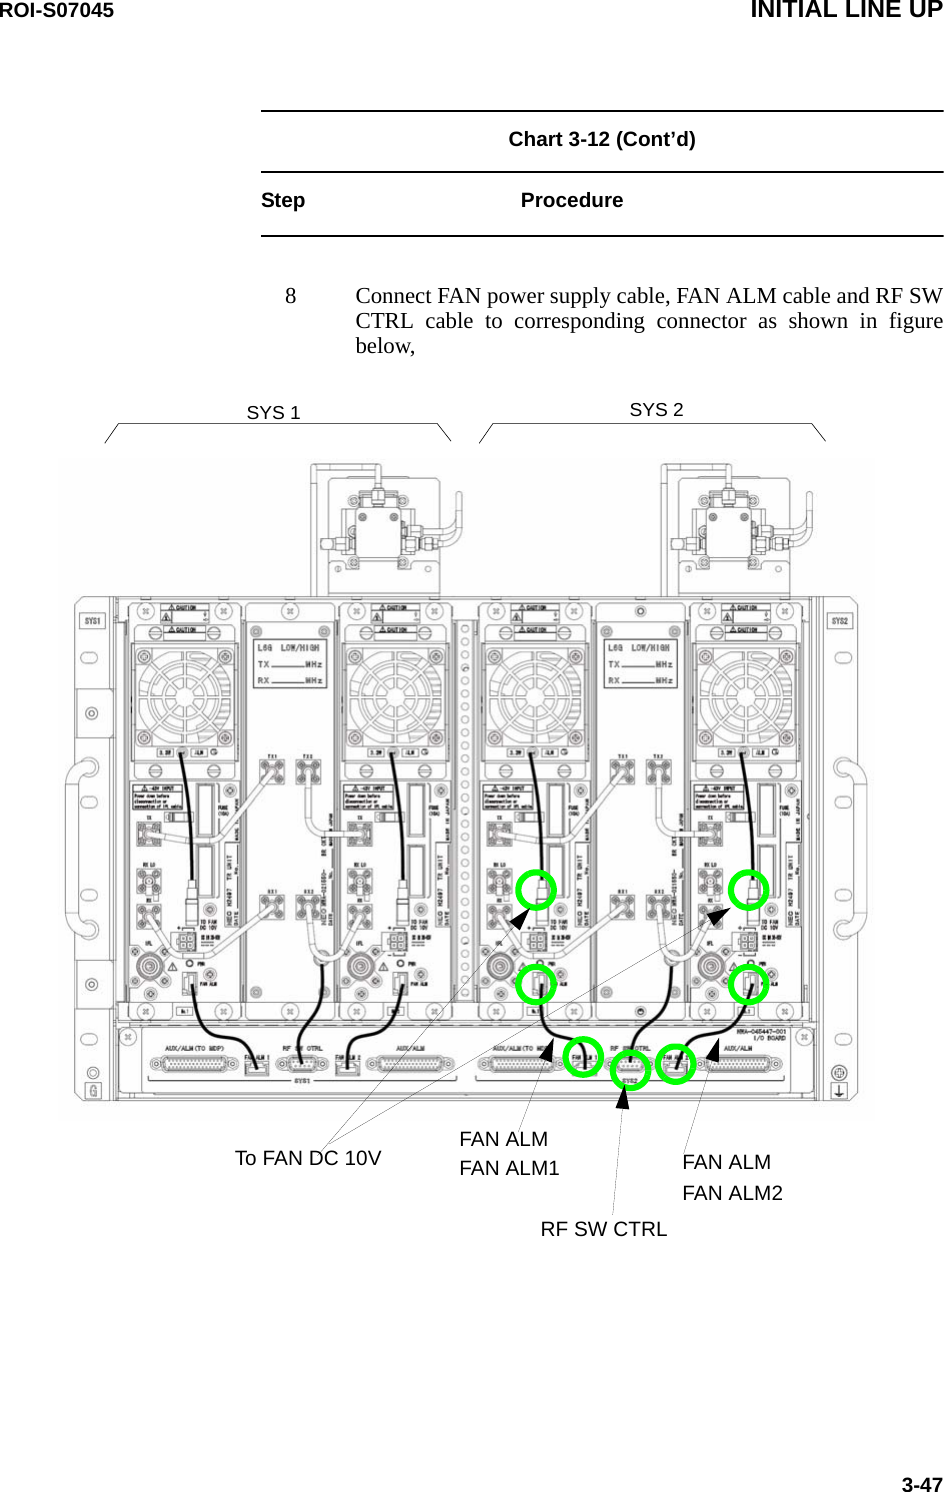 ROI-S07045 INITIAL LINE UP3-47Chart 3-12 (Cont’d)Step Procedure8 Connect FAN power supply cable, FAN ALM cable and RF SWCTRL cable to corresponding connector as shown in figurebelow,SYS 1 SYS 2FAN ALM1FAN ALMFAN ALM2FAN ALMTo FAN DC 10VRF SW CTRL